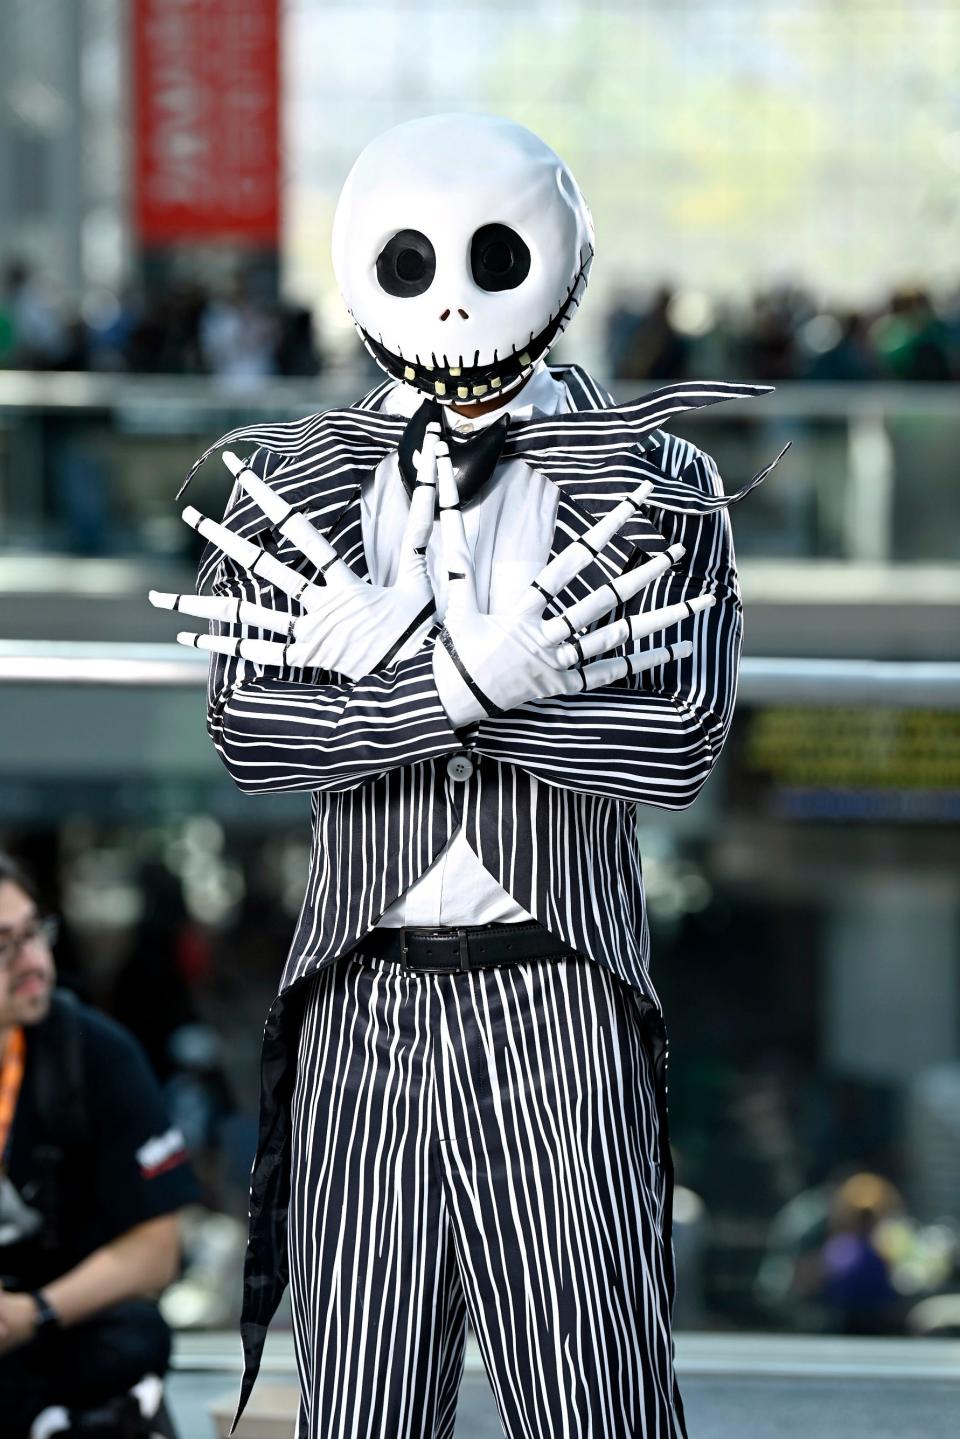 A Jack Skellington cosplayer poses during New York Comic Con 2022 on Oct. 07, 2022 in New York City.